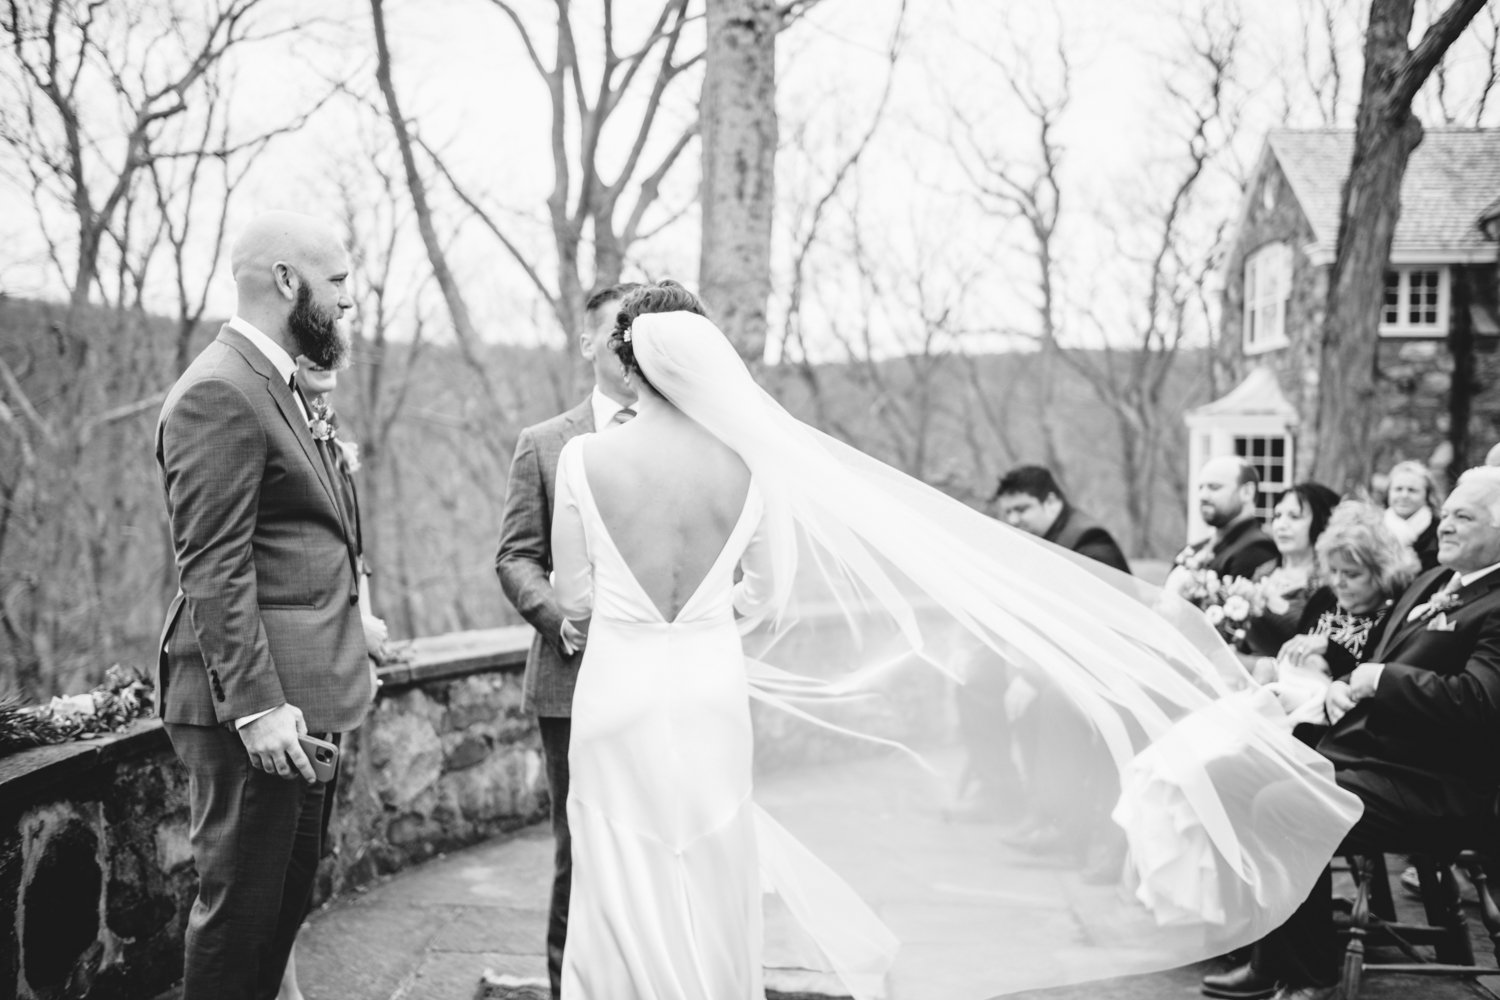 Bride faces toward the groom, away from the camera, as her veil blows in the wind.

Upstate New York Wedding Photography. Cold Spring NY Wedding Photography. Luxury Local Wedding Photographer. Destination Wedding Photographer.